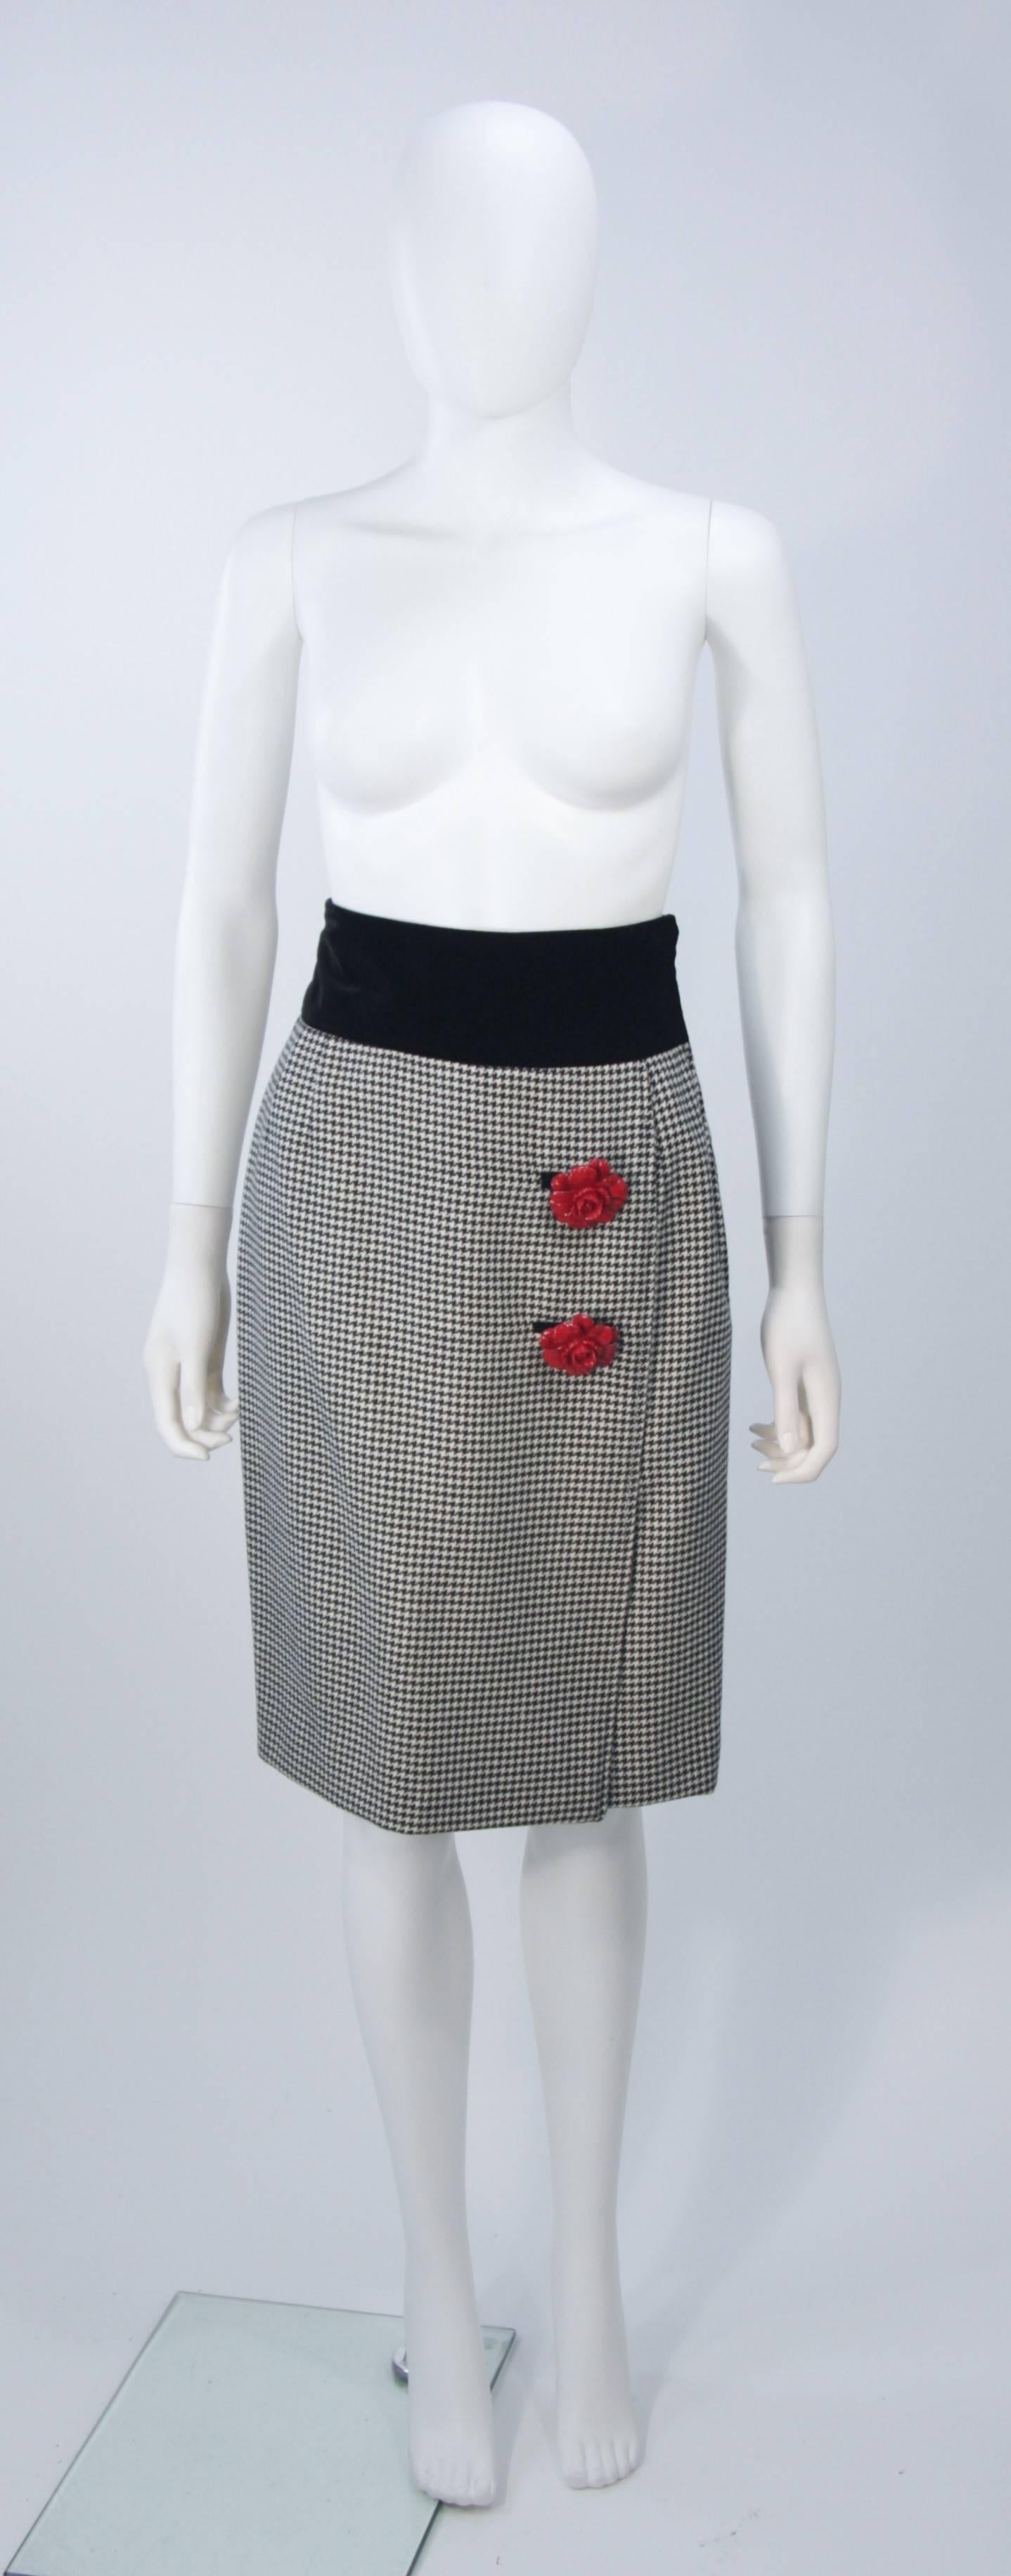 VALENTINO 1980's Rose Button Black and White Houndstooth Skirt Suit Size 8 4